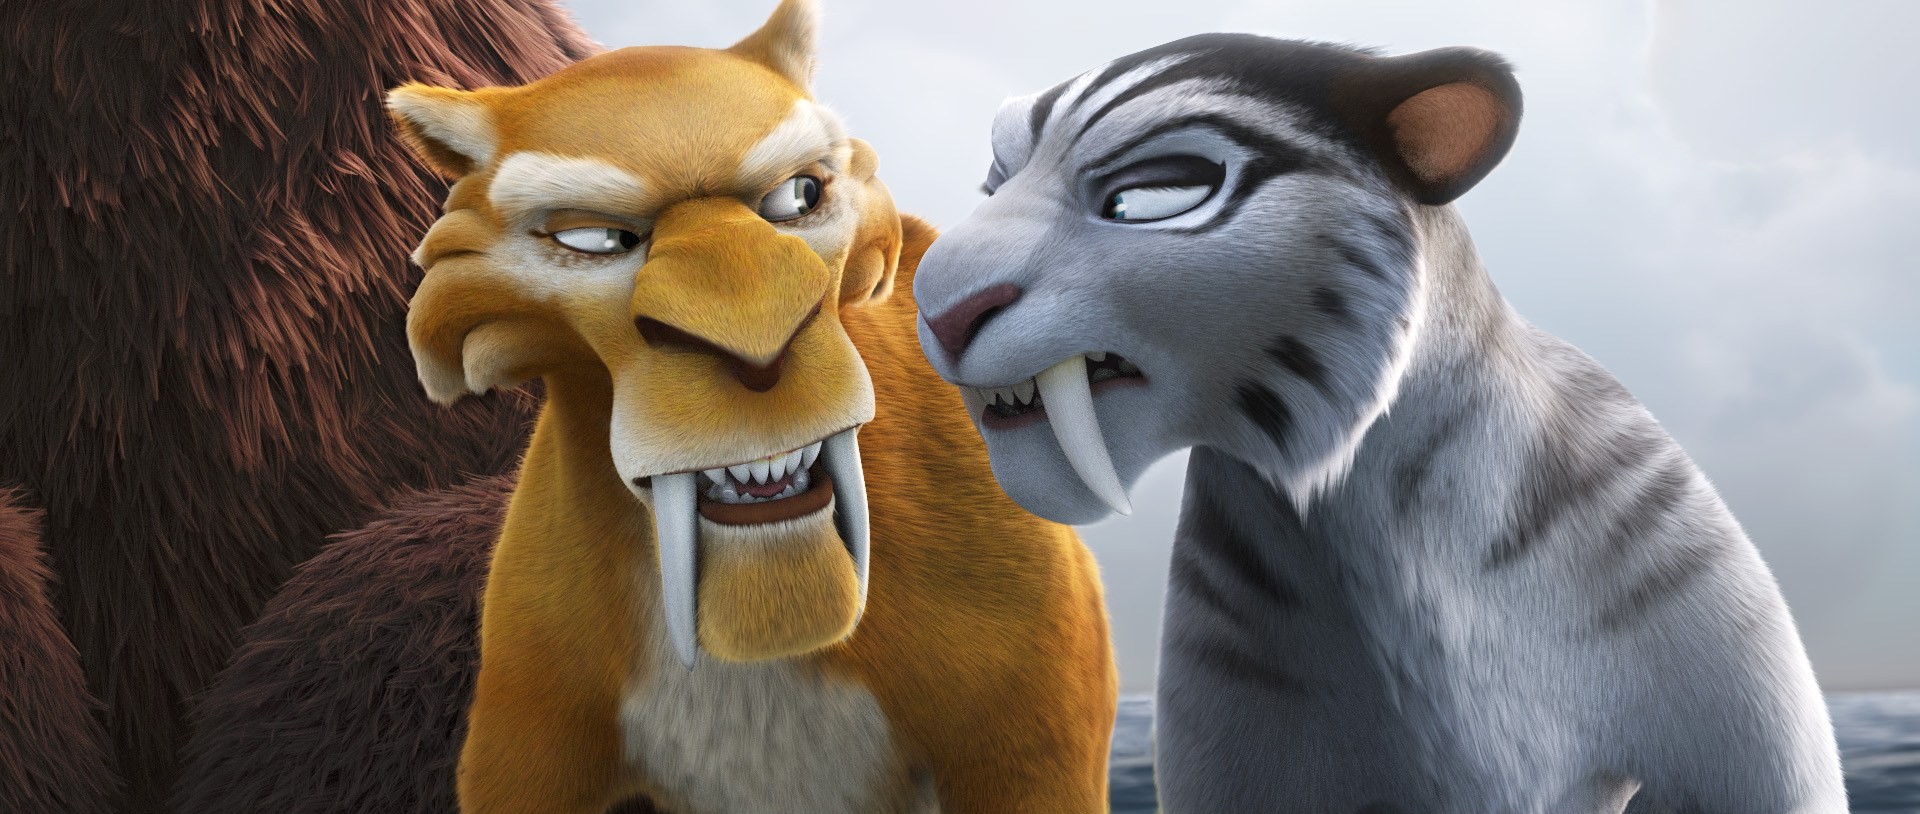 Diego and Shira from 20th Century Fox's Ice Age: Continental Drift (2012)